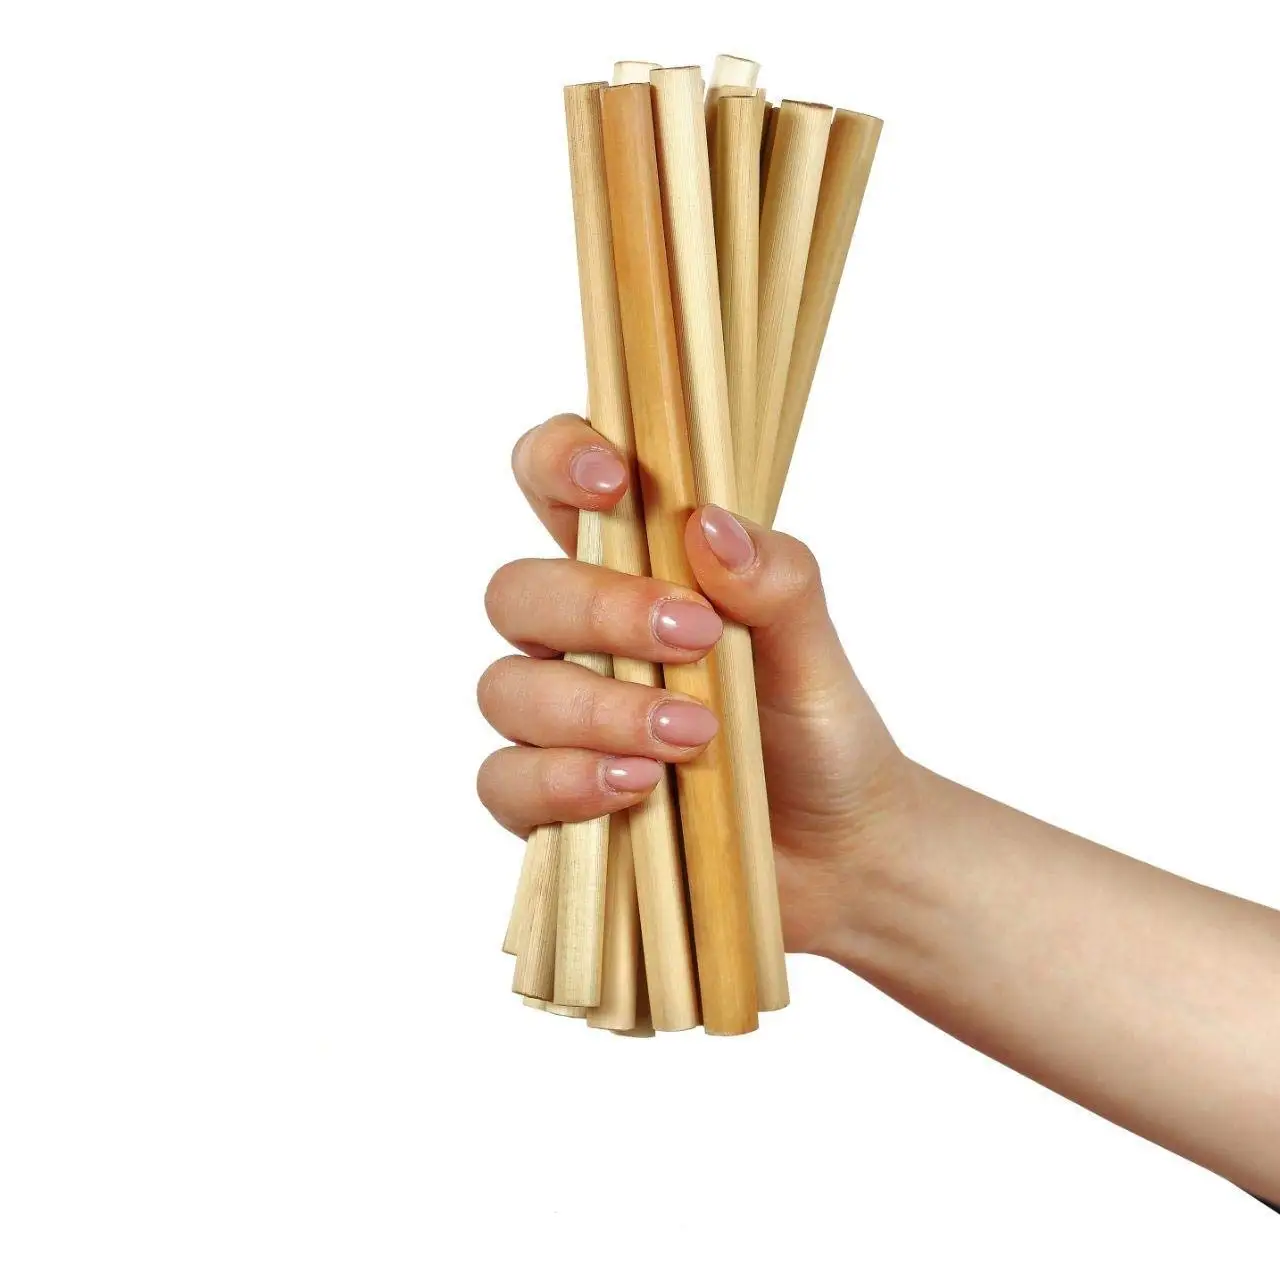 
Best Quality 2020 Natural Reusable Bamboo Drinking Straws Eco Friendly Environmentally Biodegradable Made in Wahapy Straws Vietn 